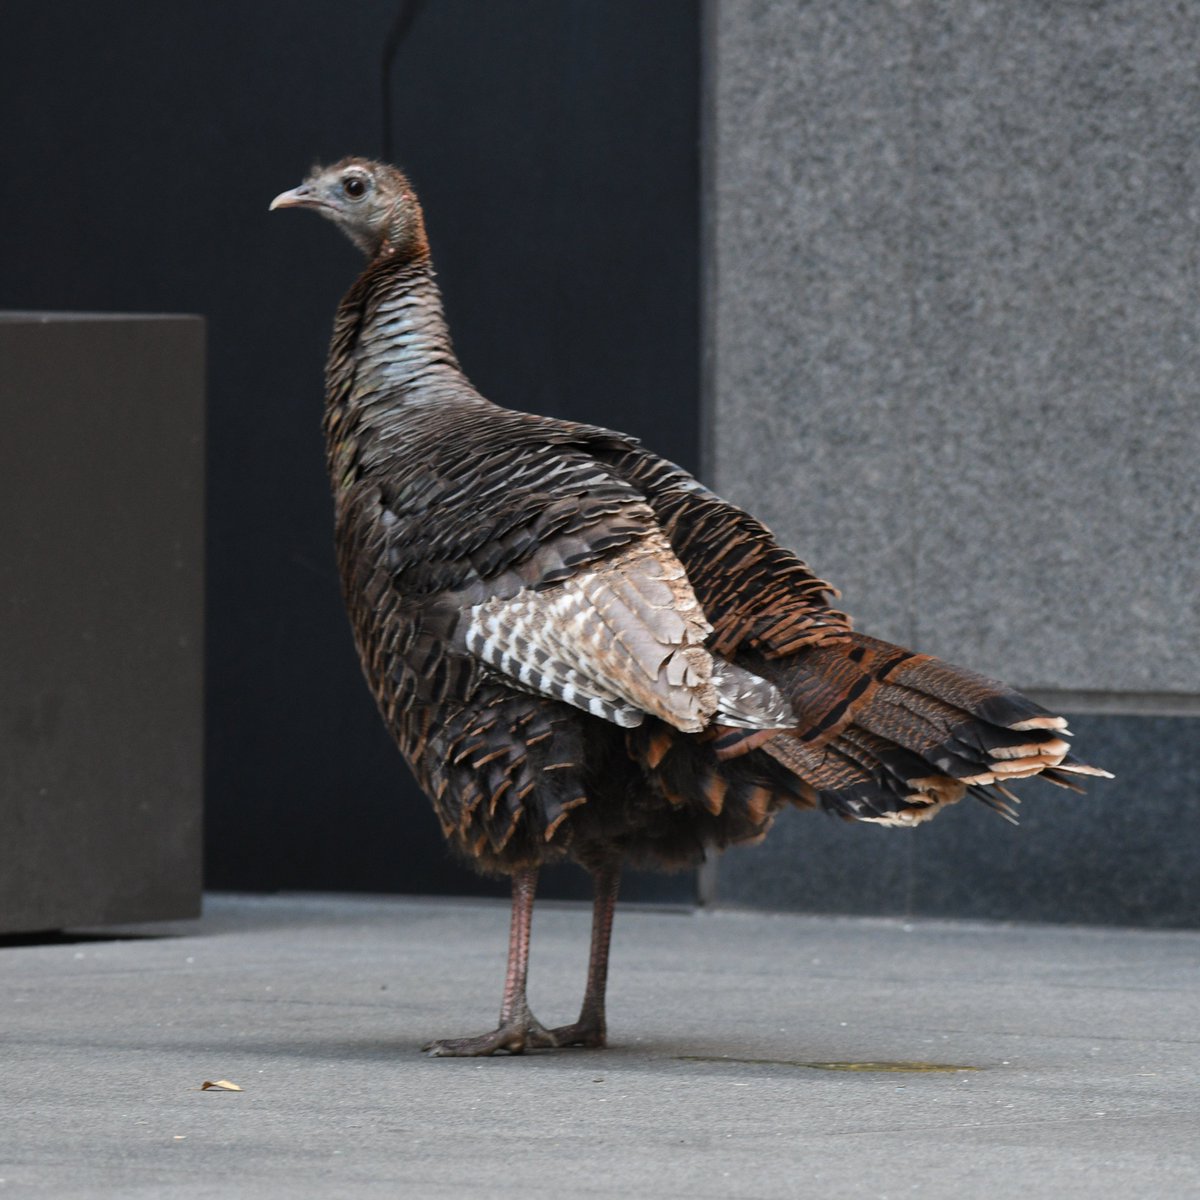 Quite unexpected, this Wild Turkey showed up in midtown Manhattan today and it continues east of Madison Avenue on 49th Street. 🦃